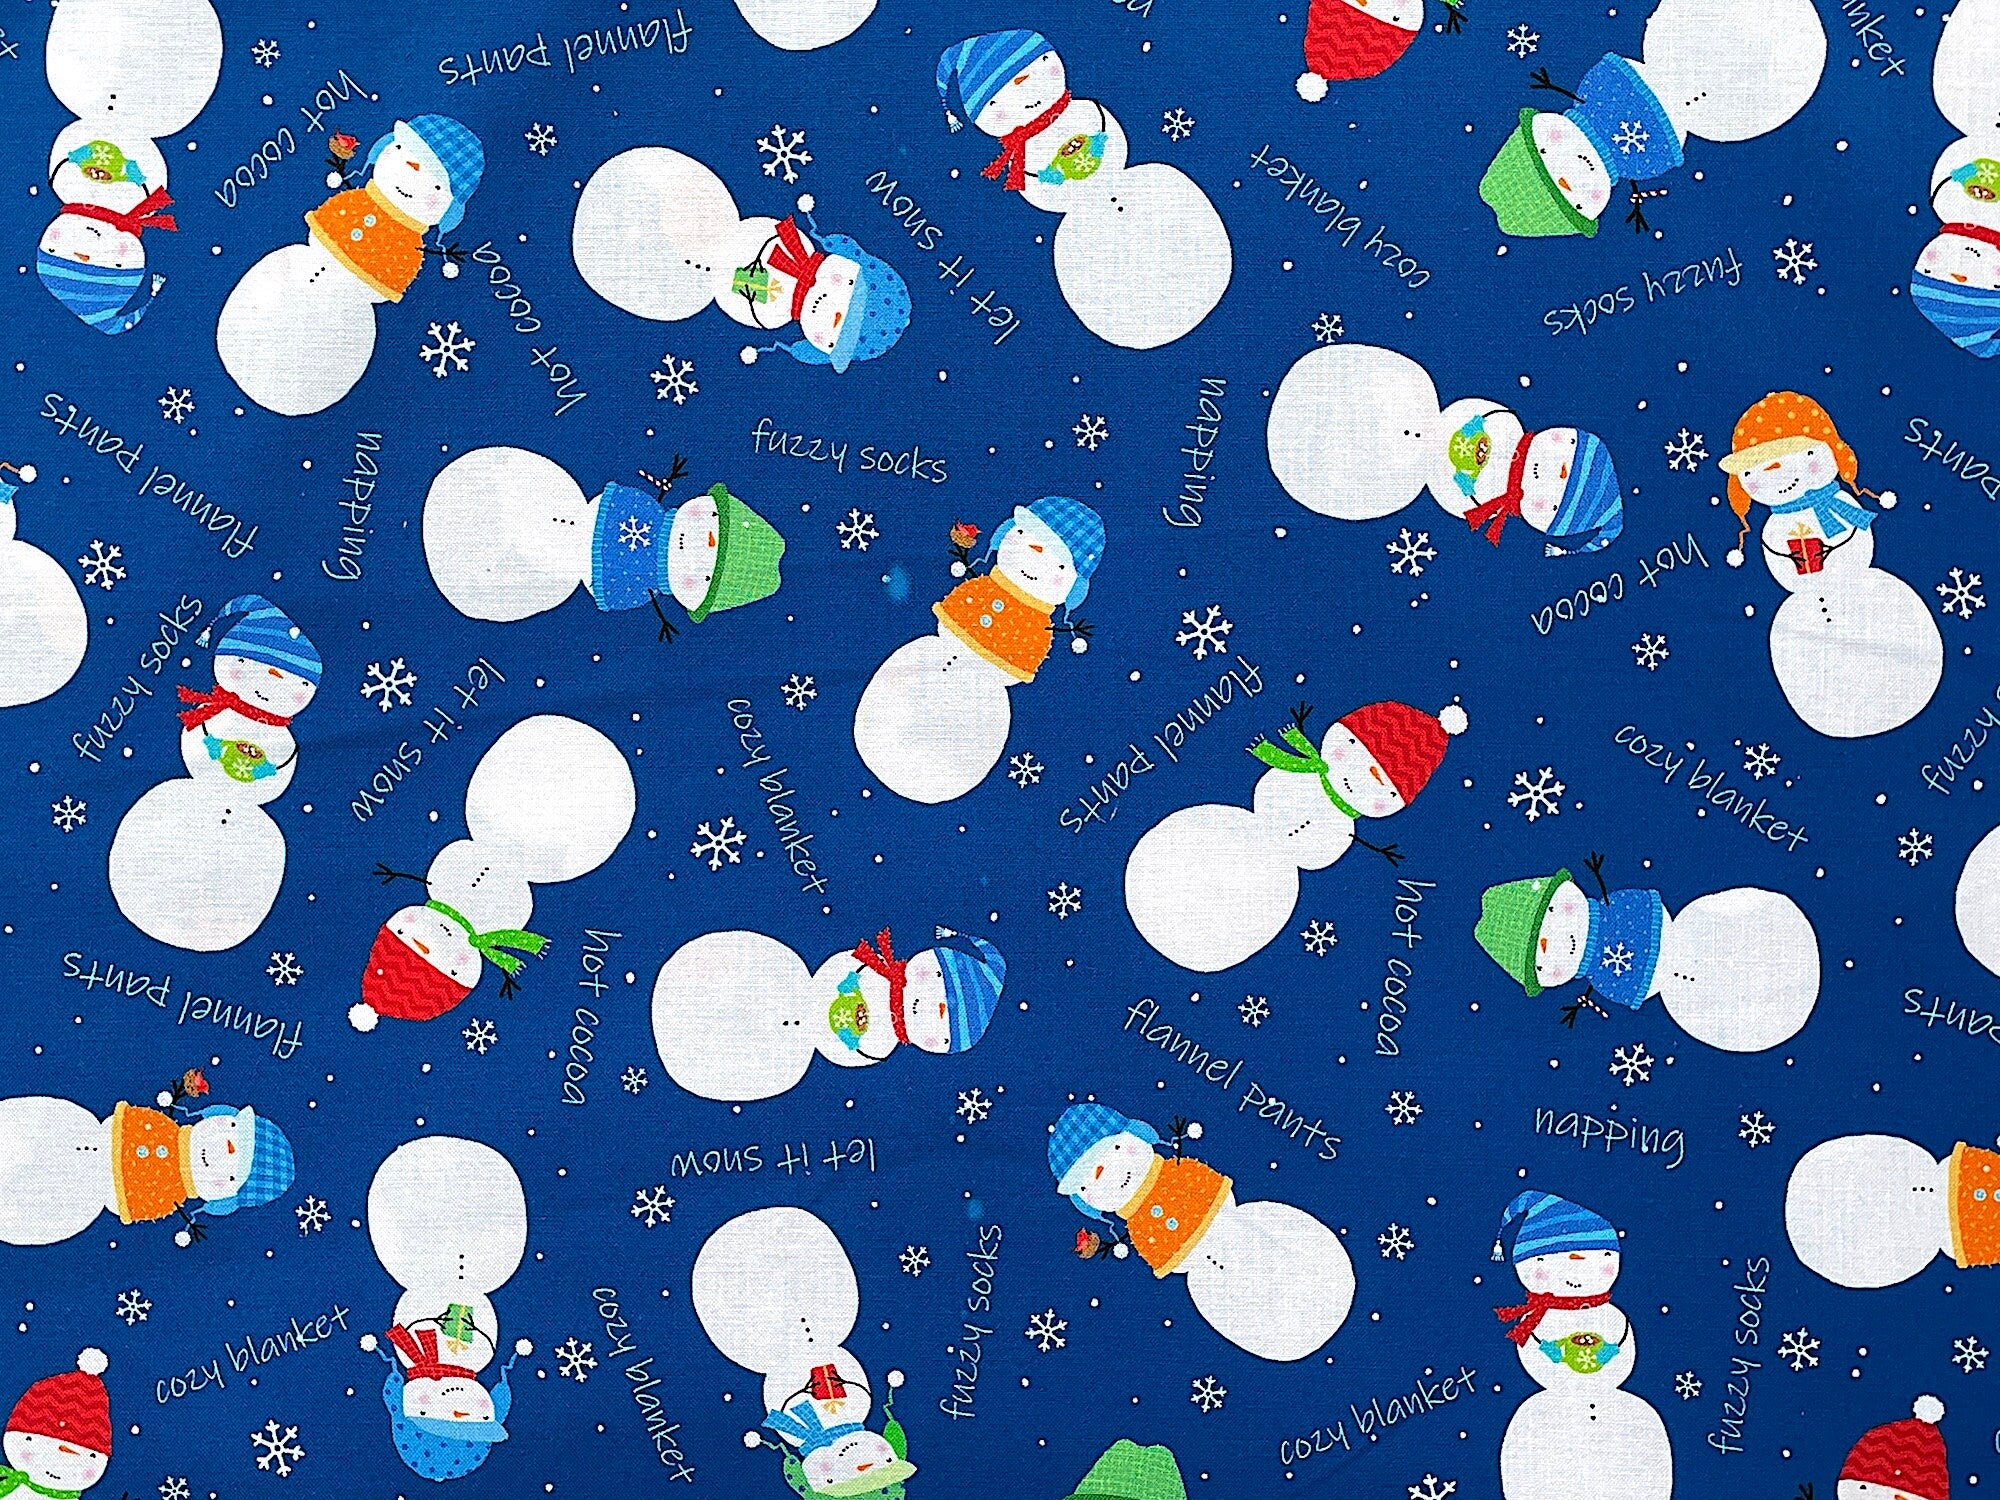 This blue fabric is covered with snowmen. The snowmen are wearing winter hats, some have scarves on or are holding a present or hot cocoa. Winter sayings such as flannel pants, fuzzy socks, napping, cozy blanket, hot cocoa are printed throughout the fabric. This fabric is part of the Winter Park collection by P&B Textiles.